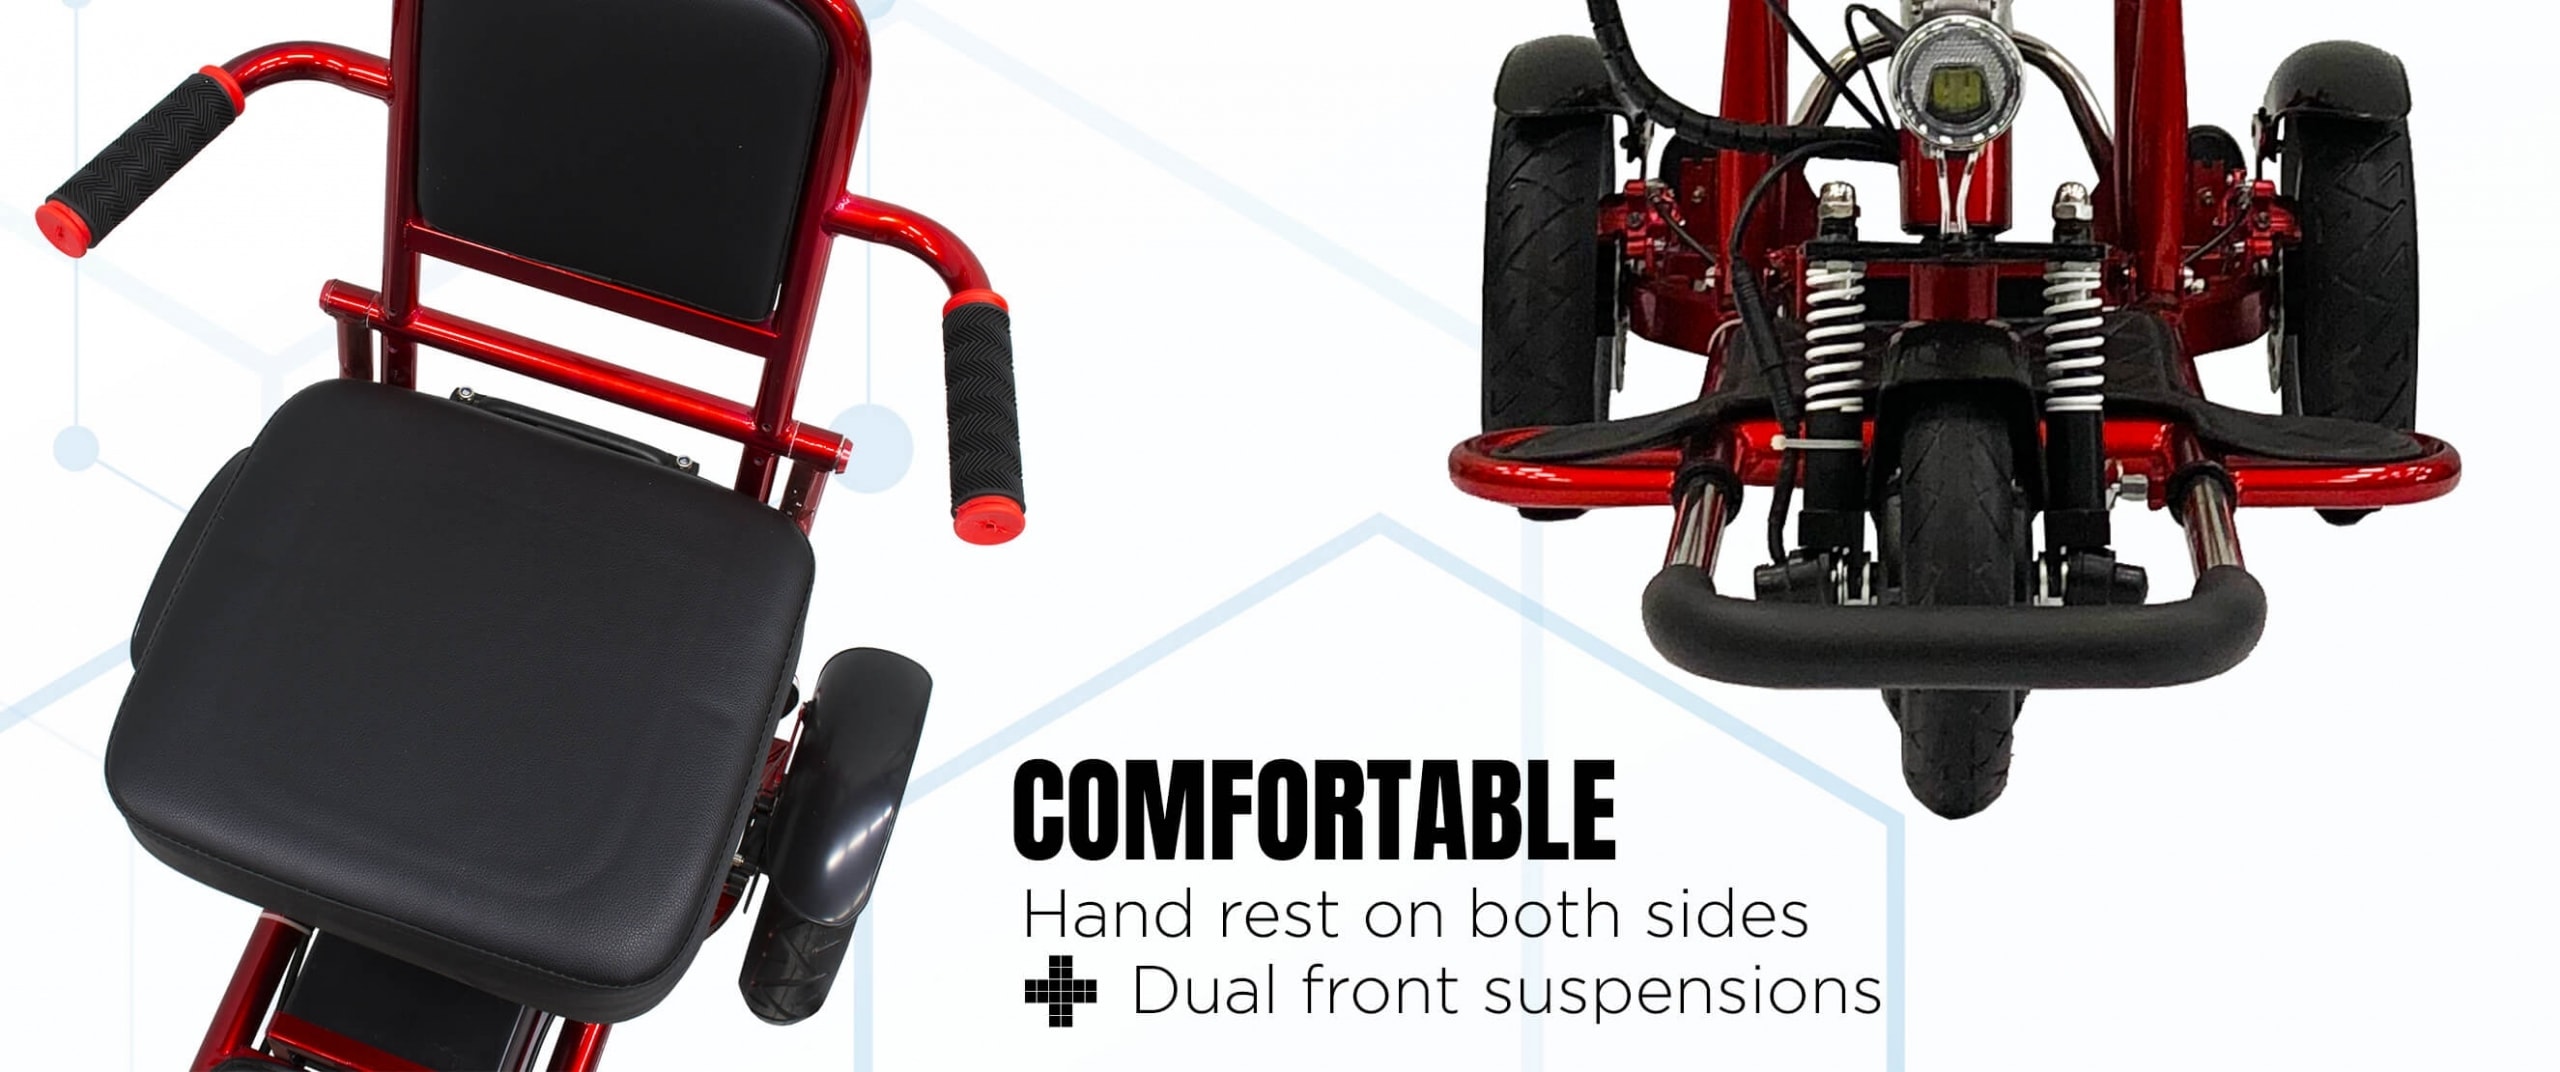 MOBOT FLEXI 4th GEN mobility scooter comfortable